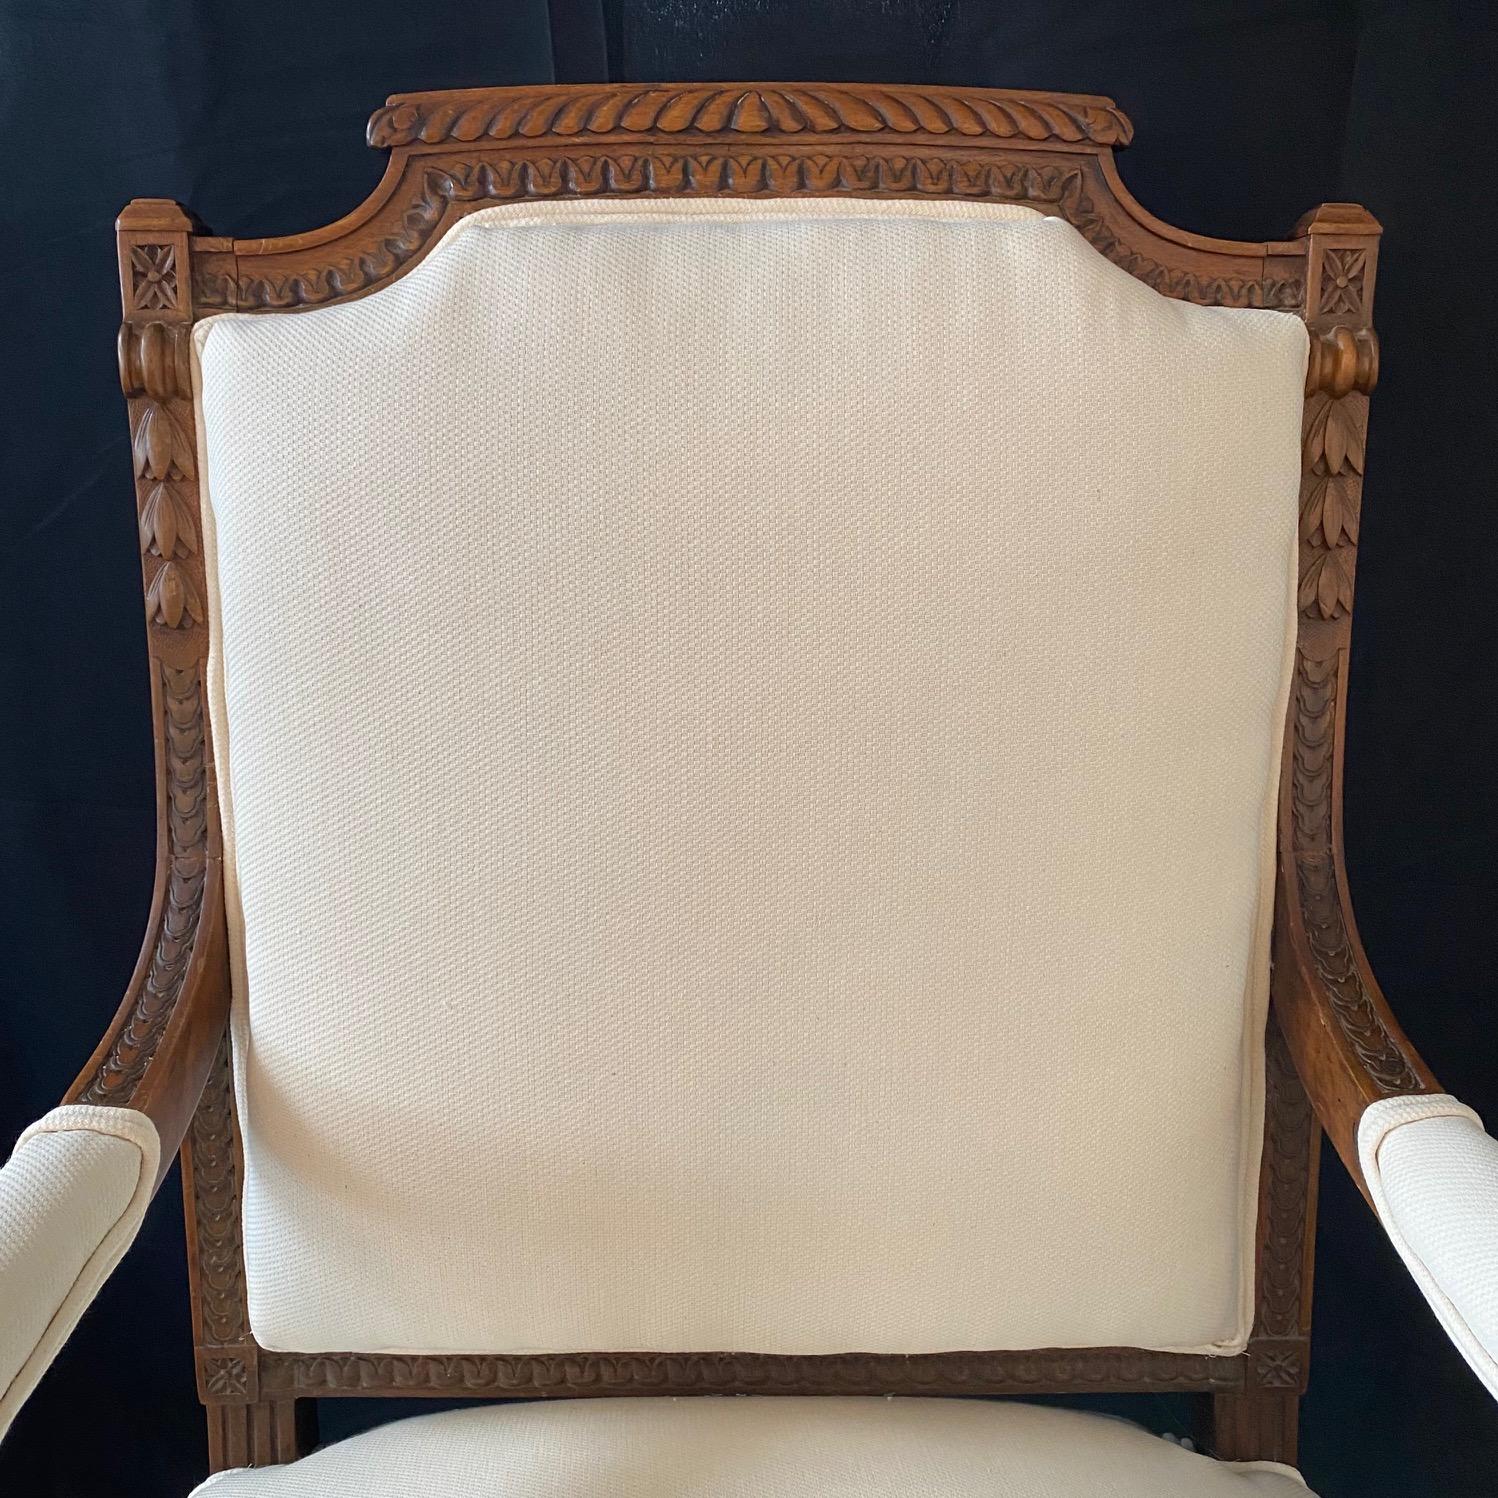 Beautifully carved exquisite neoclassical pair of walnut French chairs handcrafted in the early 19th century.  Each chair consists of an elegantly carved wood frame with acanthus leaves and corner florets, with all new linen blend high end